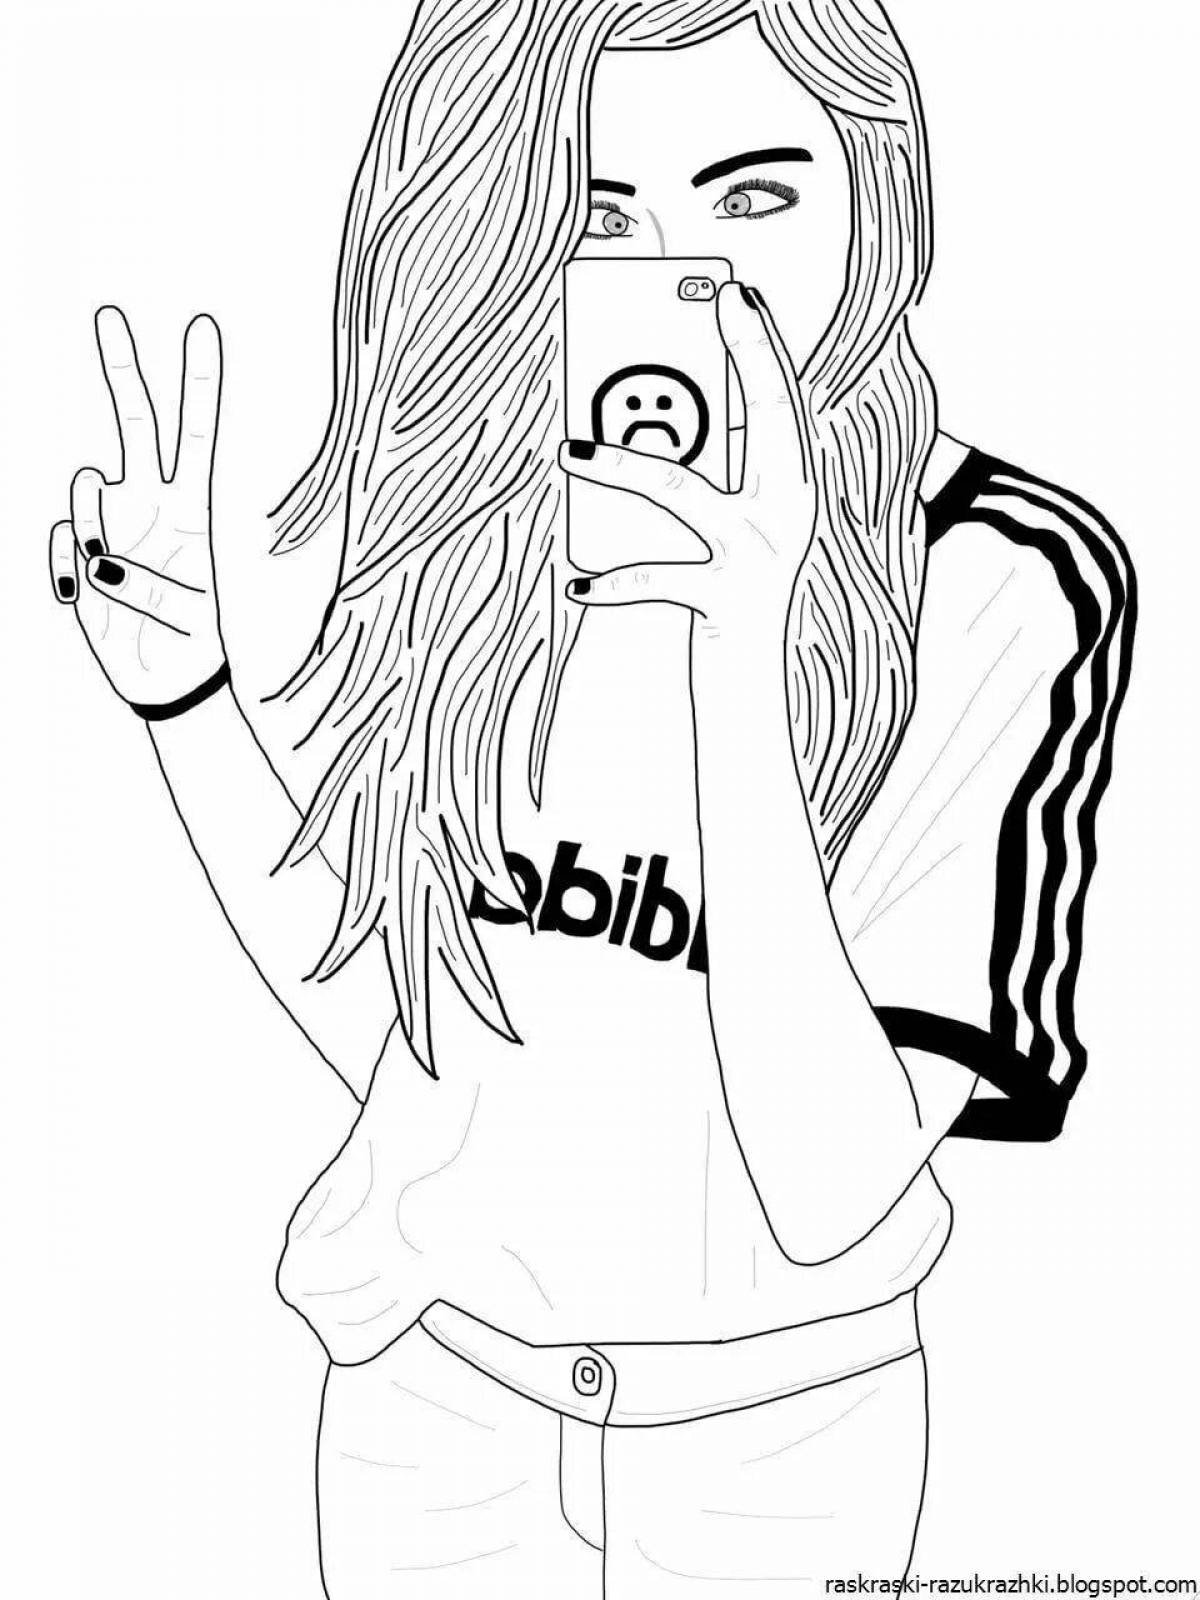 Vivacious 13 years cool coloring page